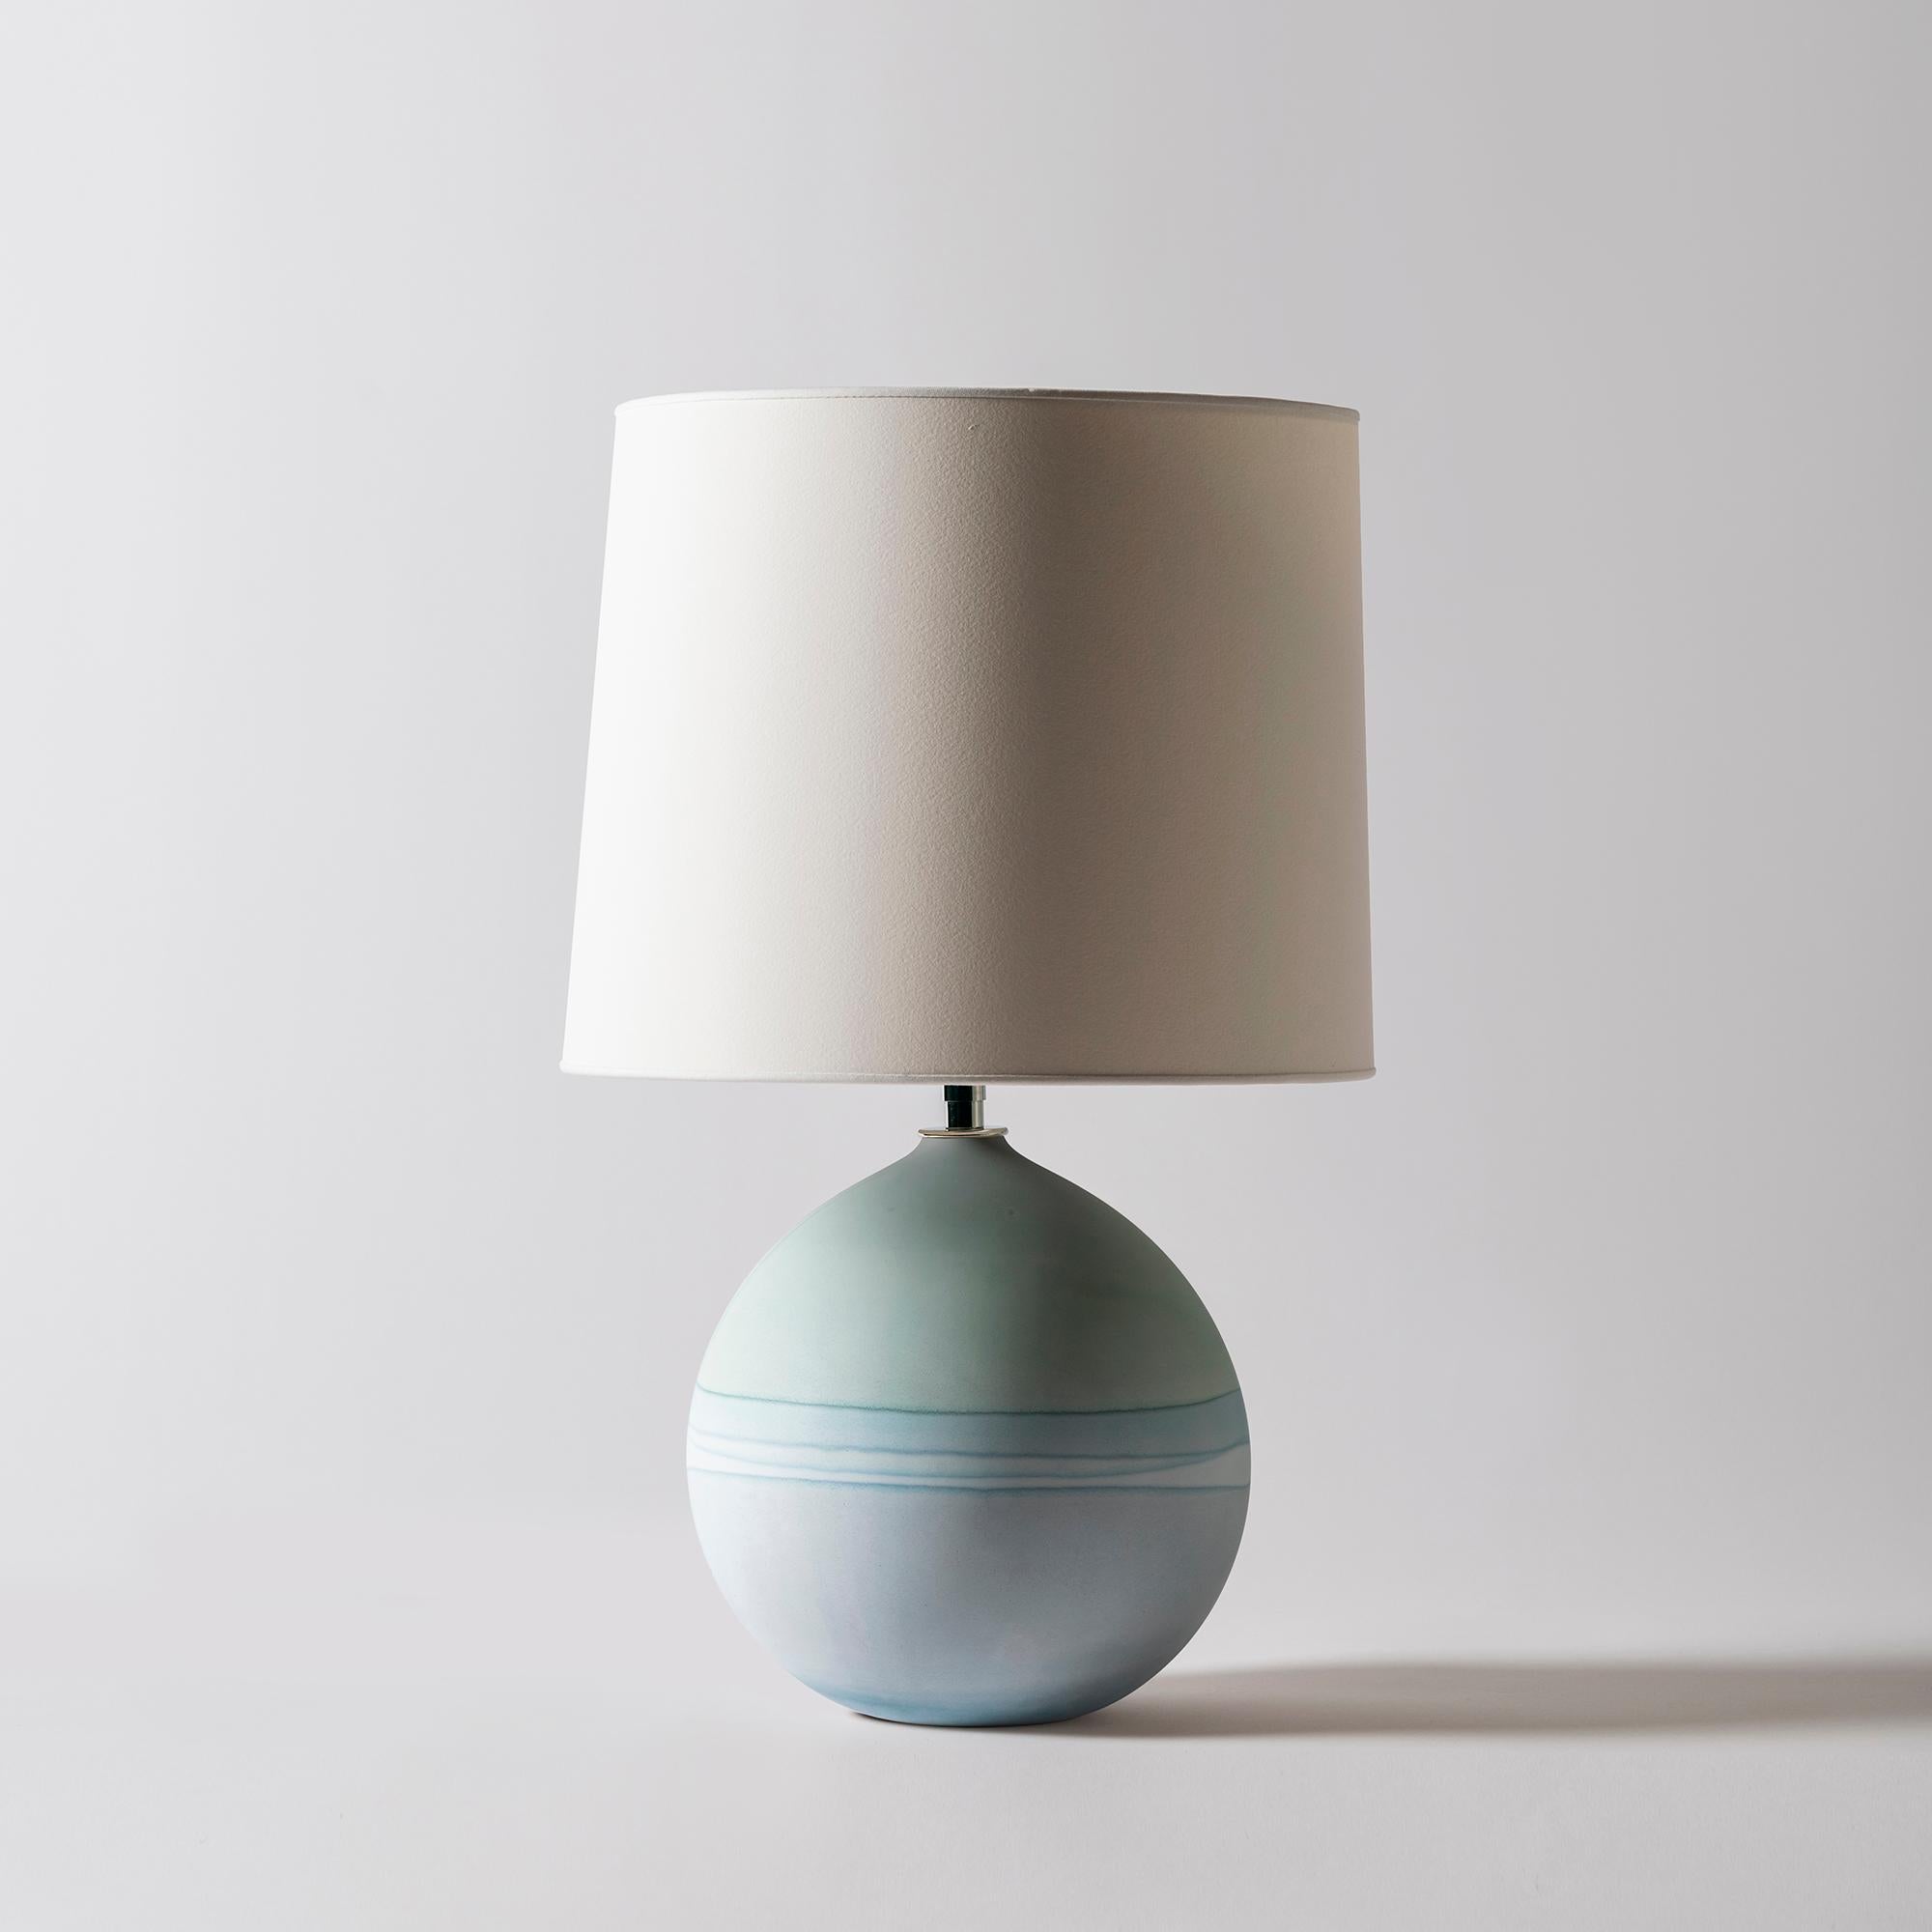 Saturn lamp in mint and grey by Elyse Graham
Dimensions: D31 x H49 cm
Materials: Plaster, Resin, Cotton rag Paper, brass, Nickel. Hardware: polished nickel-plated brass uno threaded socket
with turn key switch, in-line dimmer.
Molded, dyed, and